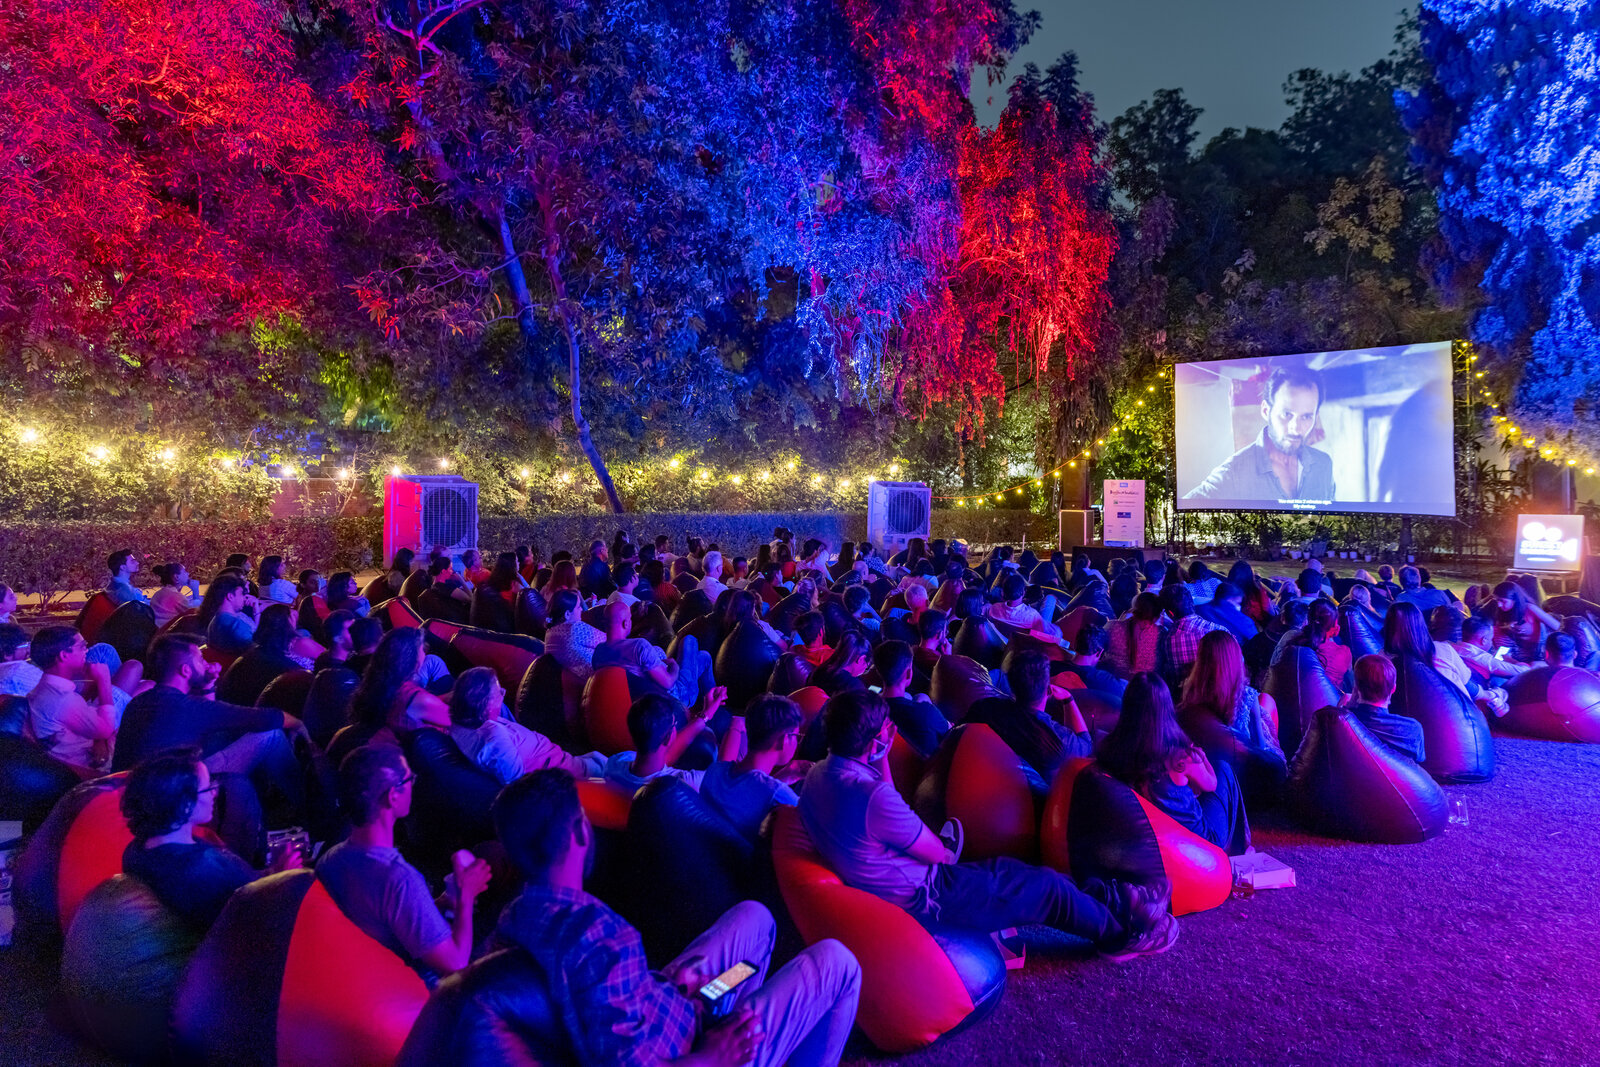 Sunset Cinema Club is all about immersive cinema experiences in India